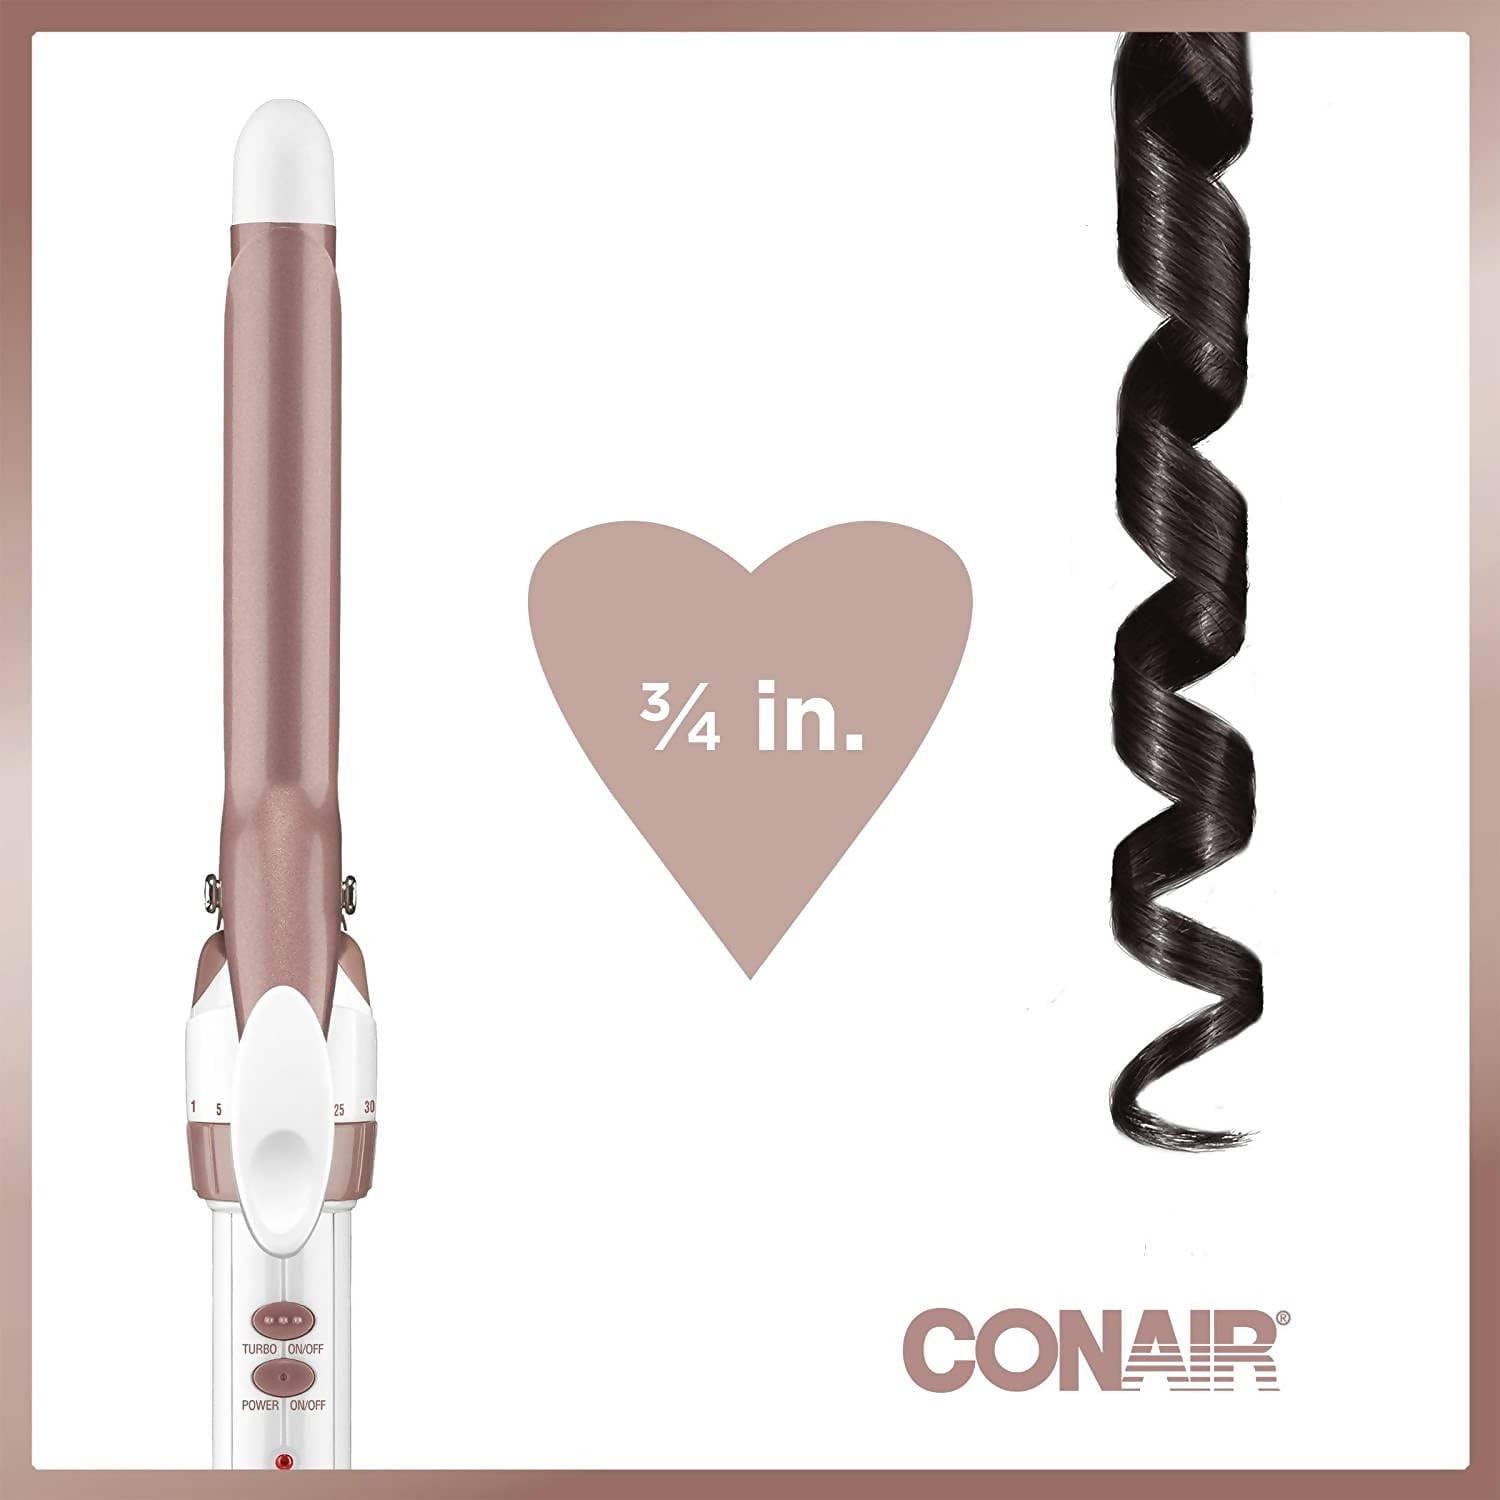 Conair Double Ceramic 3/4 inch Curling Iron (White/Rose Gold) has a higher ceramic content to deliver even heat, fast styling and long-lasting curls - C-CD700GN